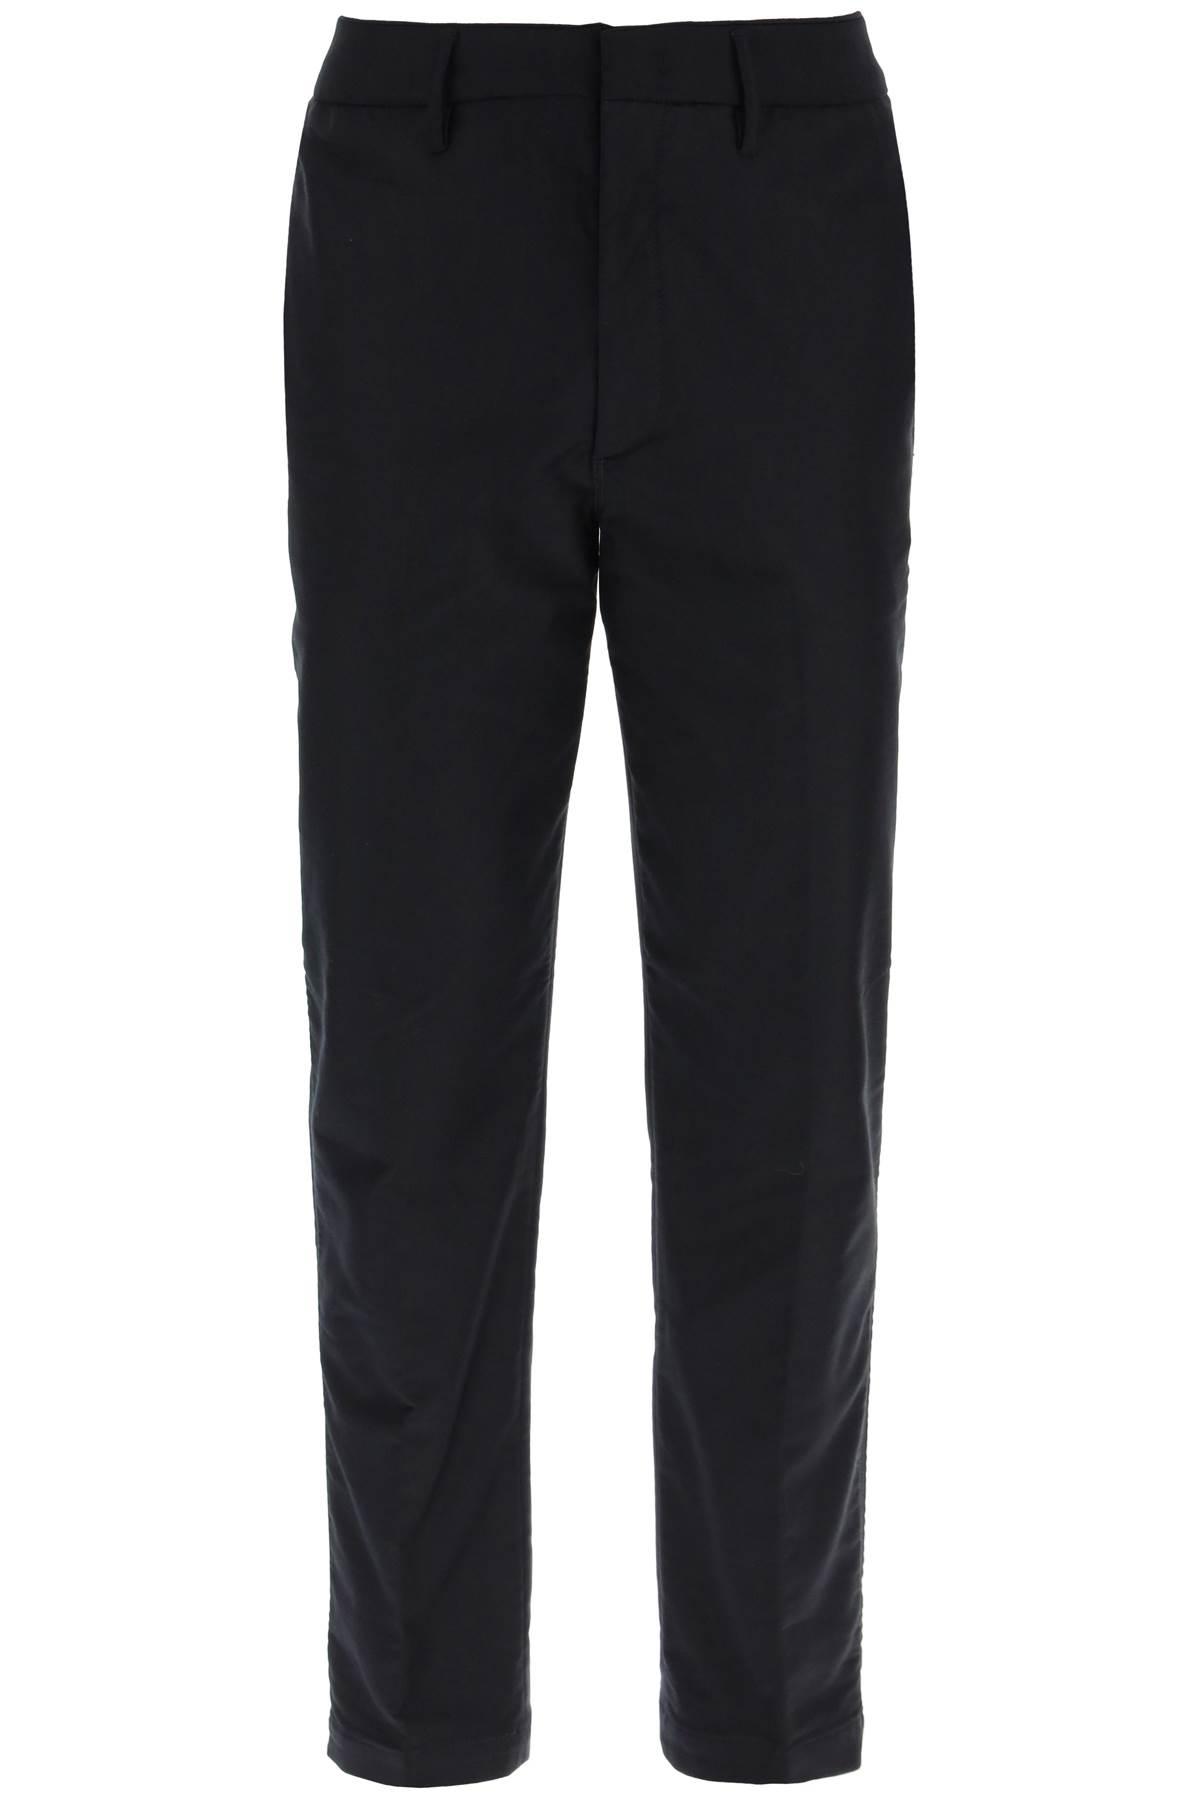 Emporio Armani Cotton And Modal Chino Pants in Black for Men | Lyst